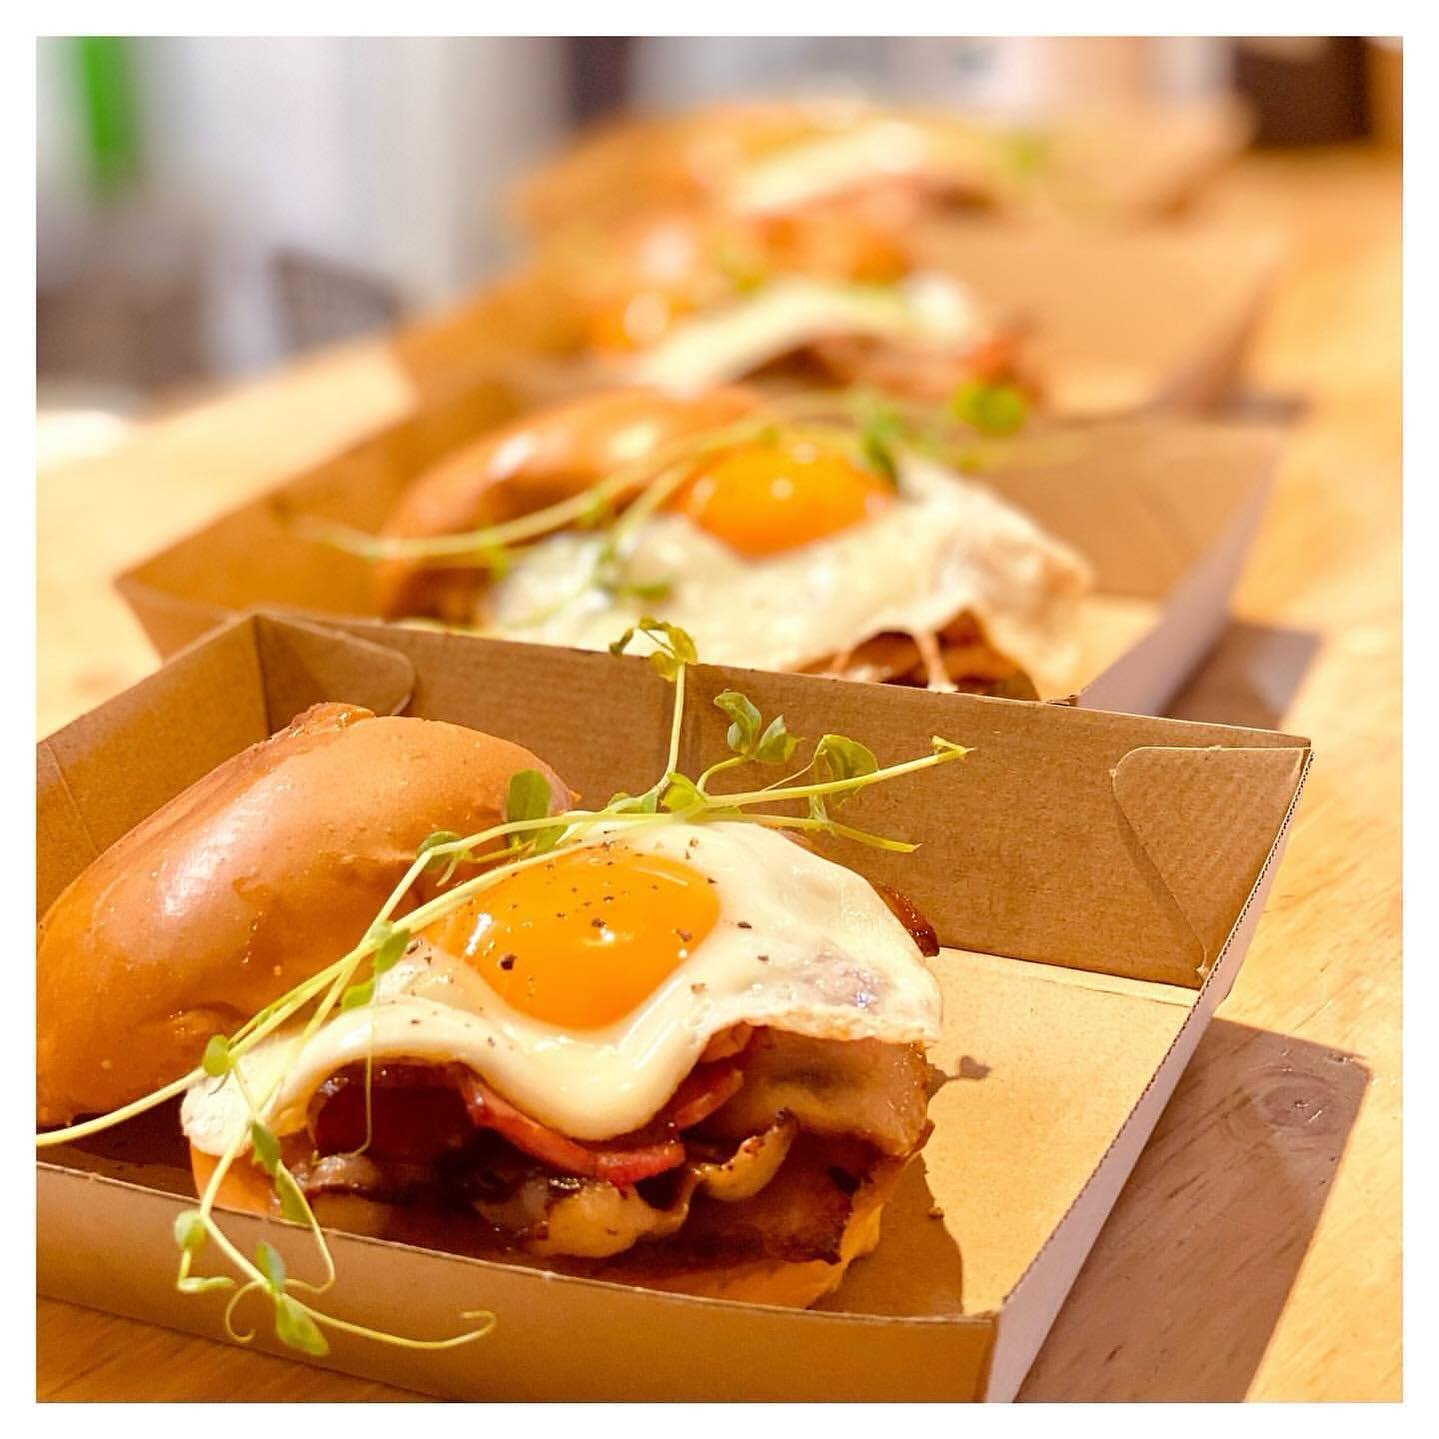 Bacon &amp; Egg Rolls for the entire family ✊🏼
Because there simply is no better way to feed the soul than filling up here at @birchwood_jindabyne
🙋🏻&zwj;♀️ Remember, you can order online (Mr Yum - link in bio) before heading in, we will give you 